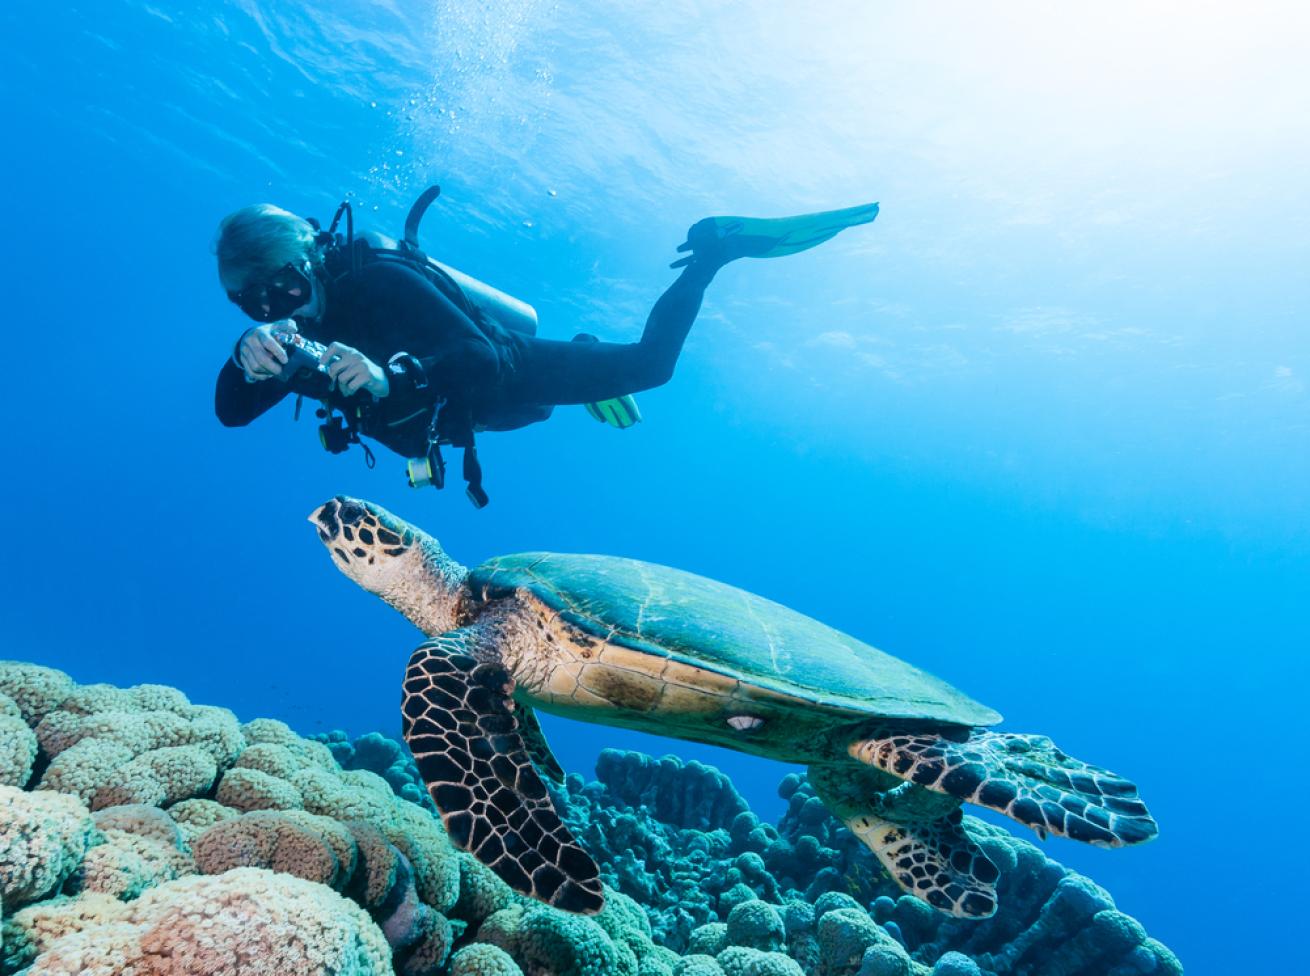 diver taking a photograph of a hawksbill